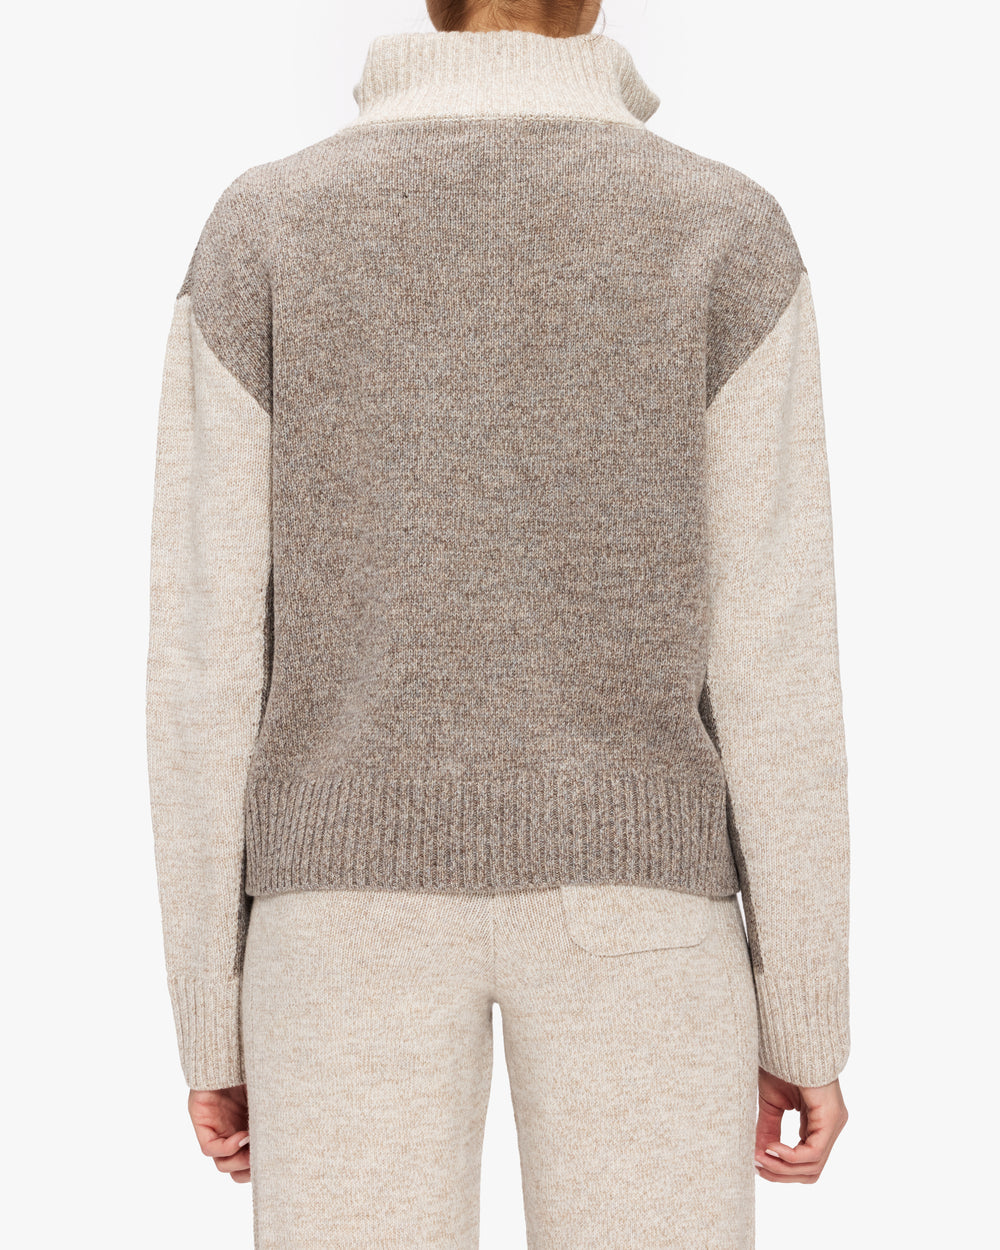 Monrow Wool Cashmere Marled Color Block Half Zip Sweater